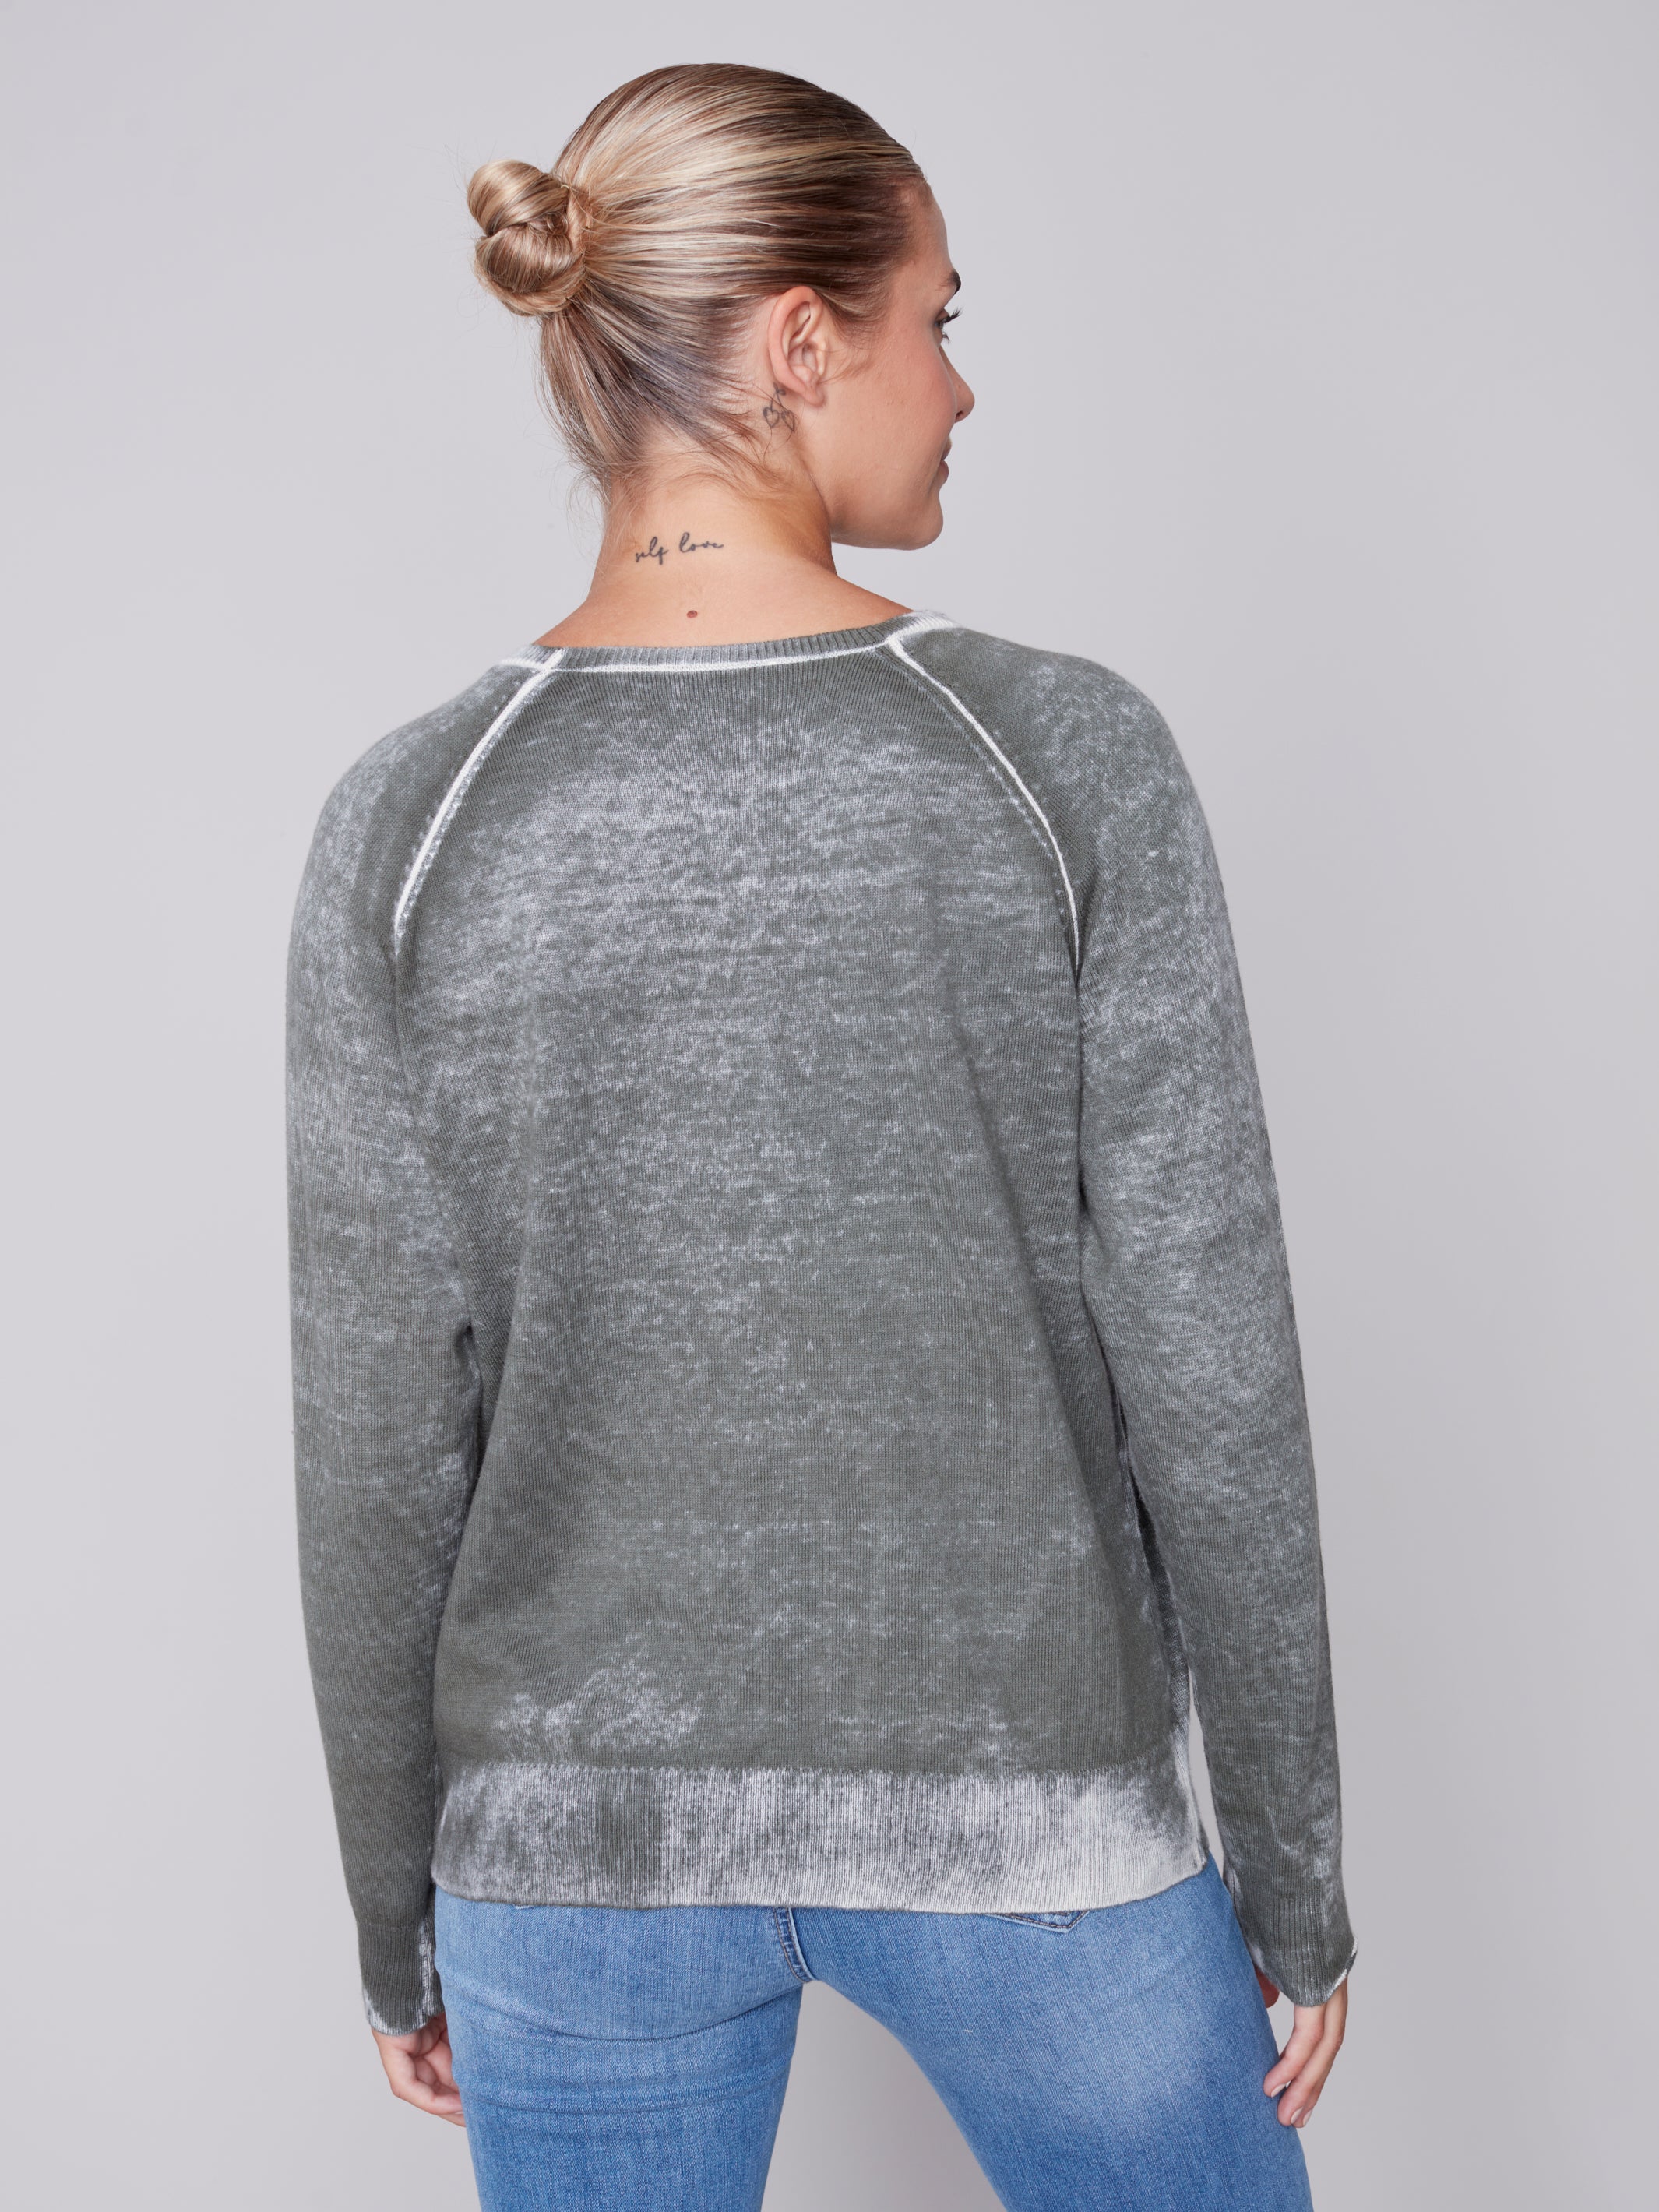 Charlie B Raglan Sleeve Washed Out Sweater - Spruce